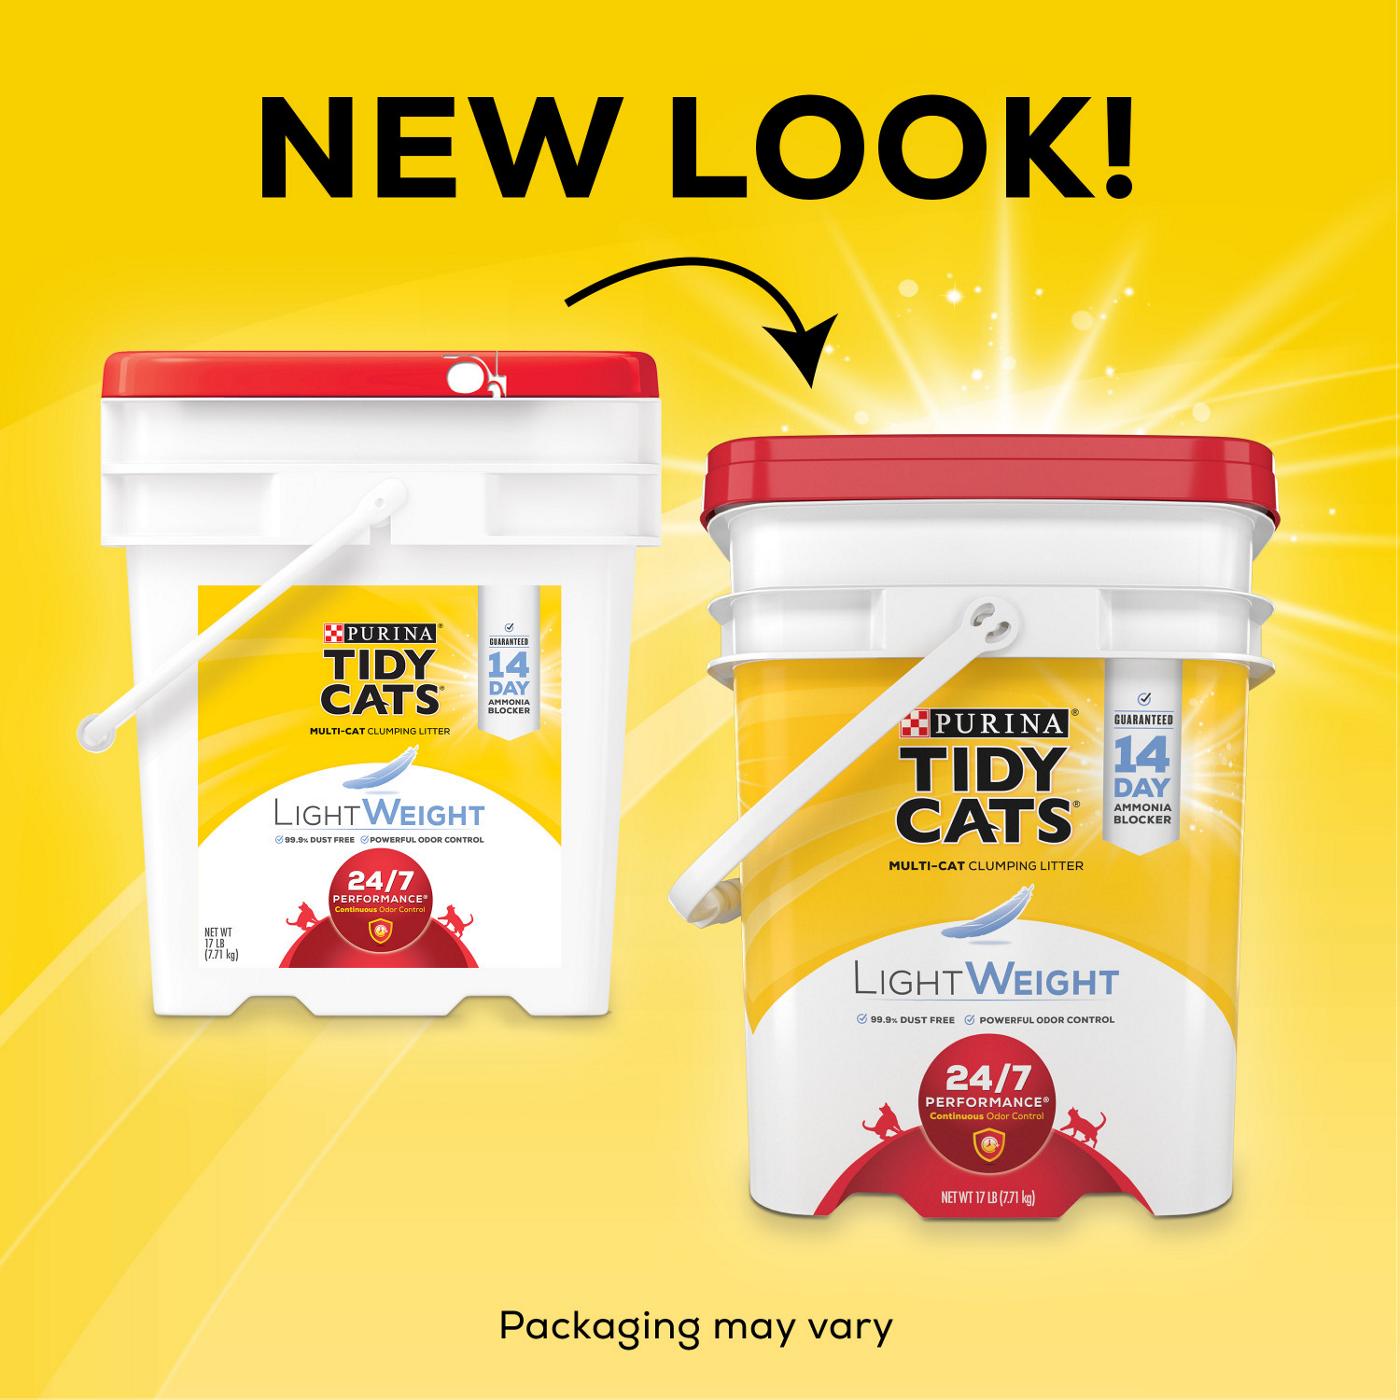 Tidy Cats Purina Tidy Cats Light Weight, Low Dust, Clumping Cat Litter 24/7 Performance Multi Cat Litter; image 2 of 7